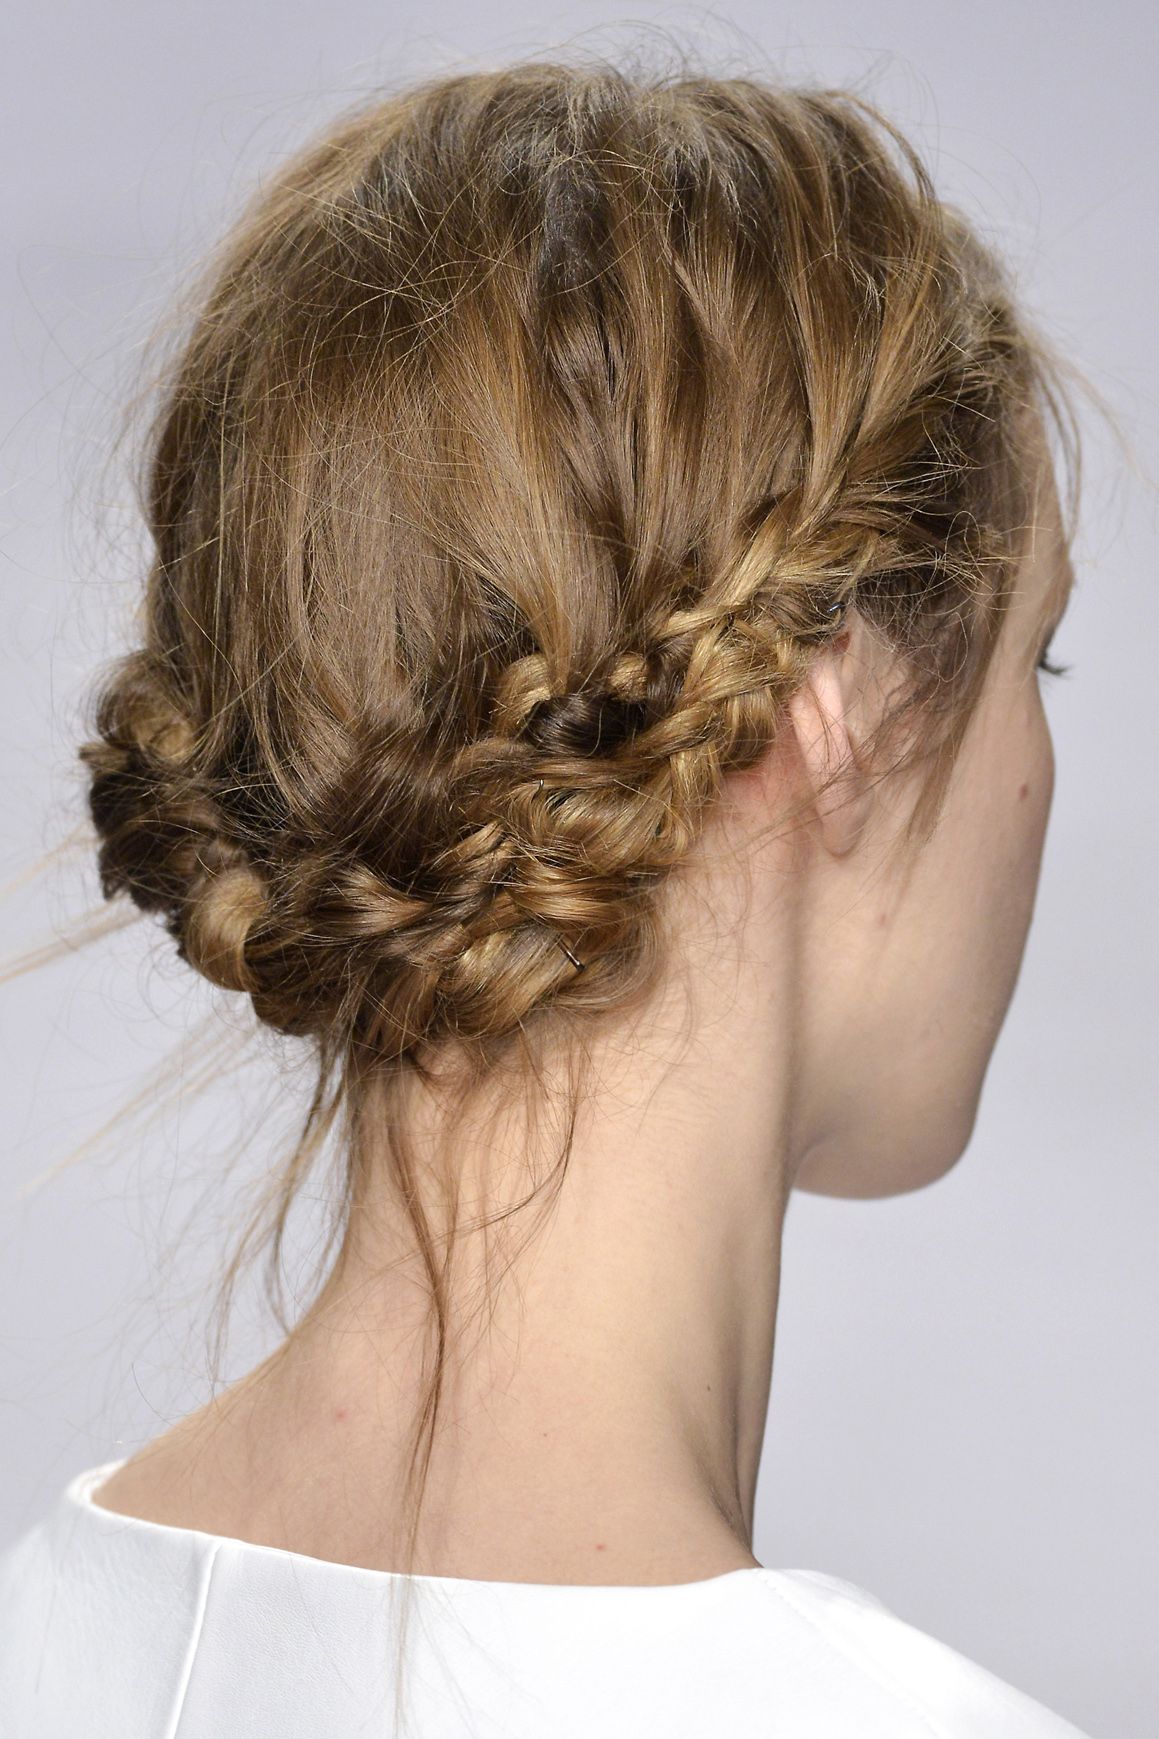 13 NoFuss Hairstyles That Are Shockingly Pretty and Easy  SheKnows